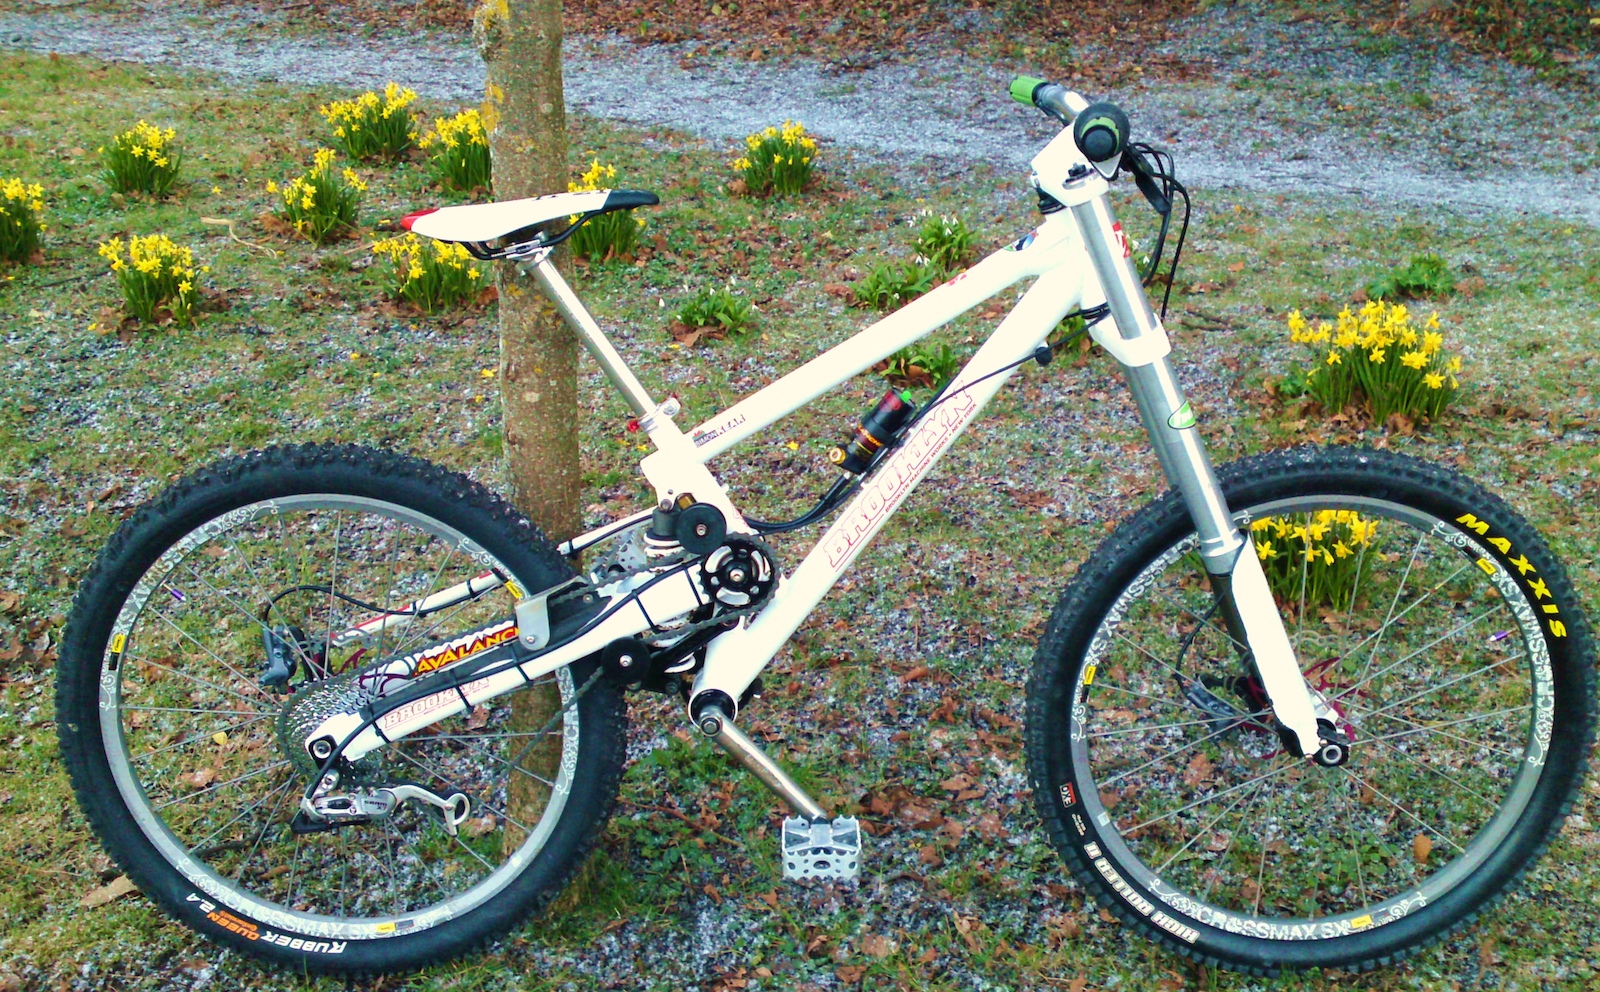 At last....the Brooklyn Racelink is complete !!! The first ride was priceless....Shivers up front and Avalanche on the rear, I have never ever ridden a rig that comes close to this monster weighing in at 47lbs. A huge machine so balanced but brutal, I think this would conquer any mountain in the world !!!